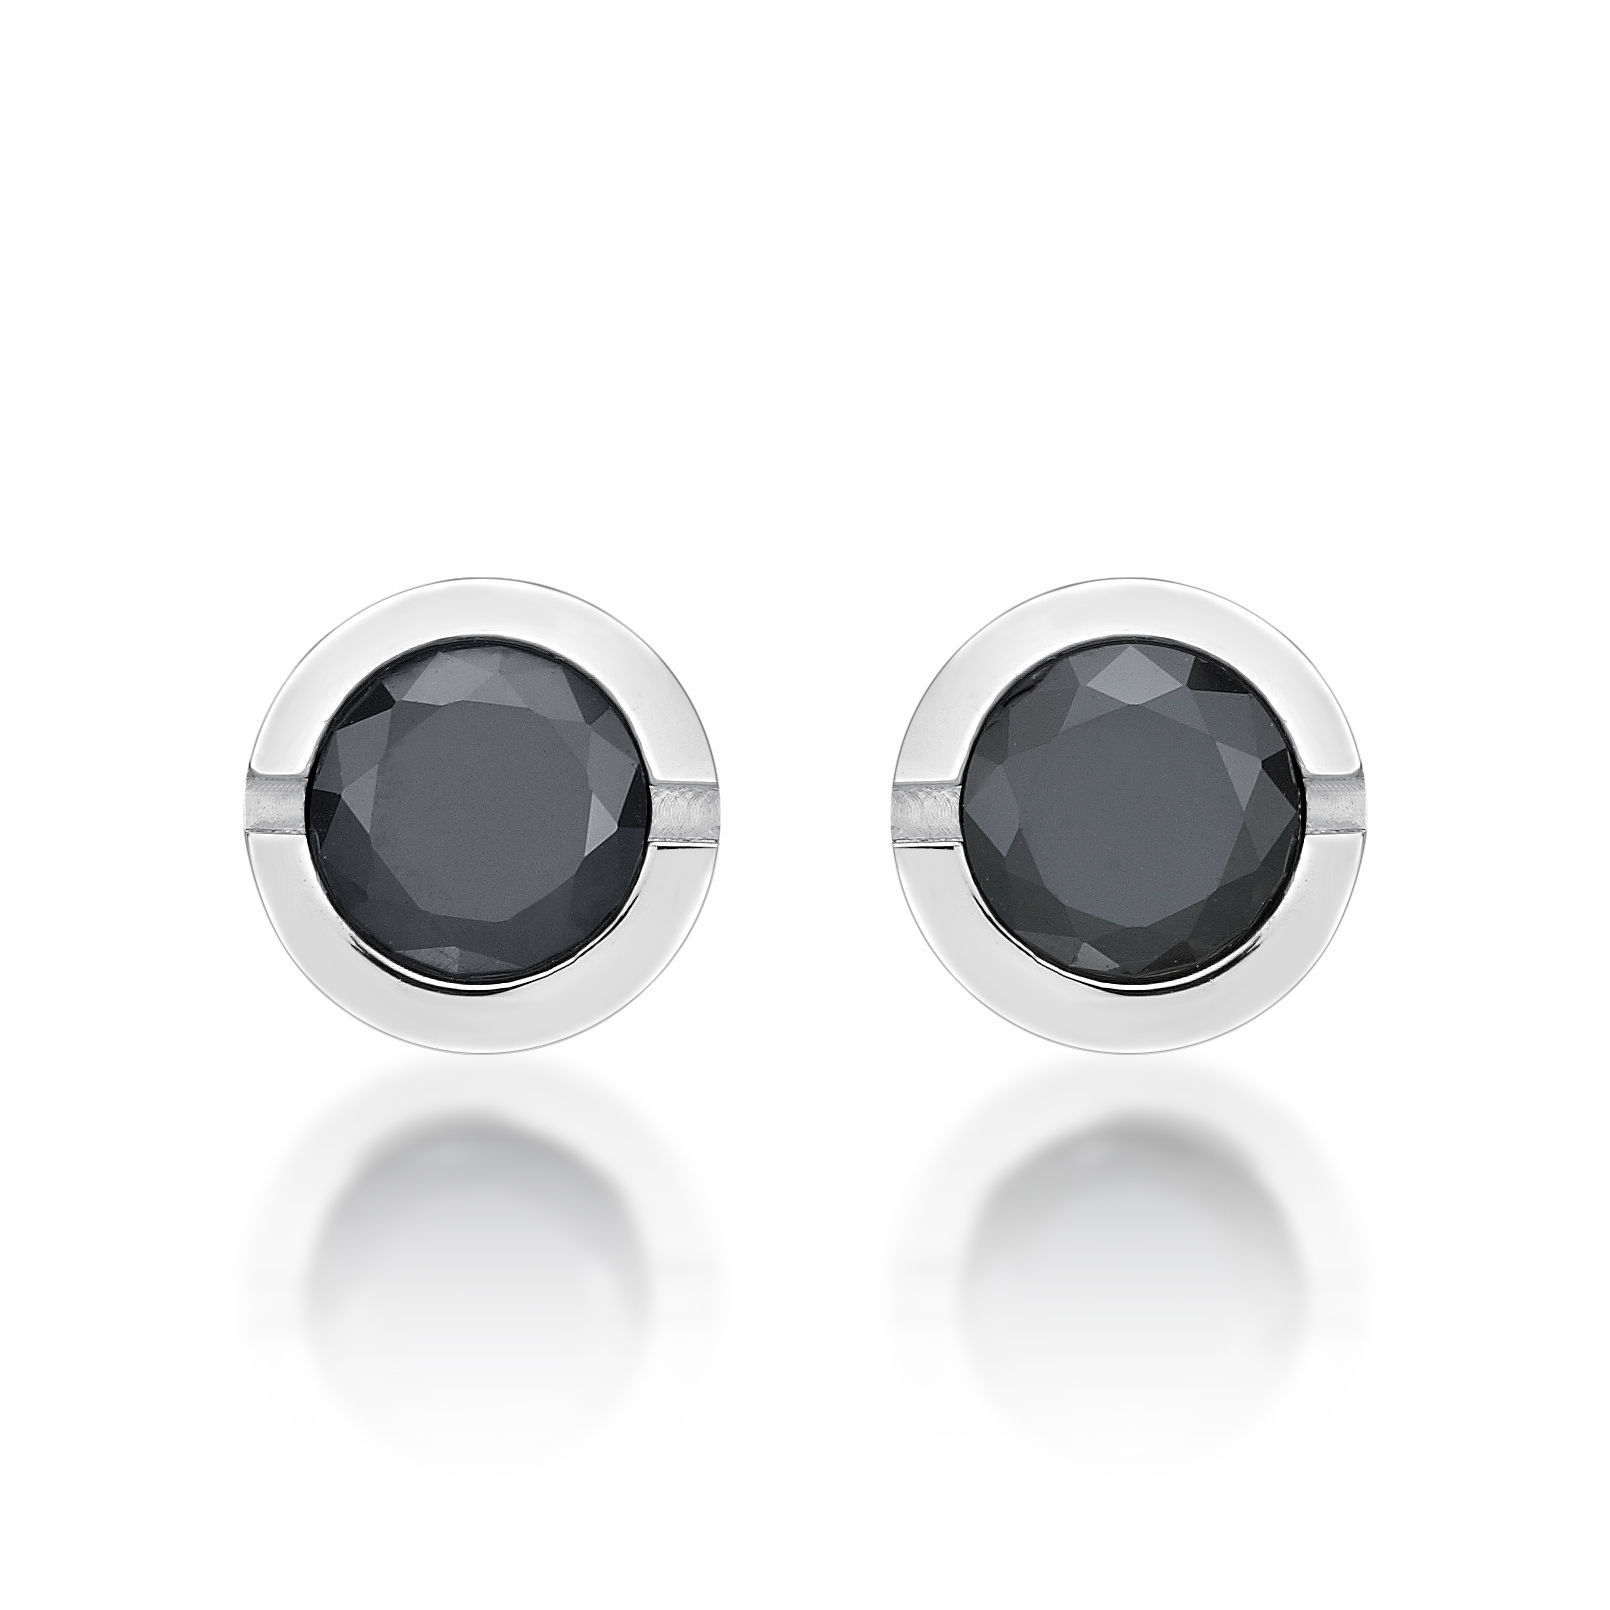 Men's Round Black Cubic Zirconia Stainless Steel Stainless Steel Round Stud Earrings - 9MM with Friction Back (Pair) | Metro Jewelry